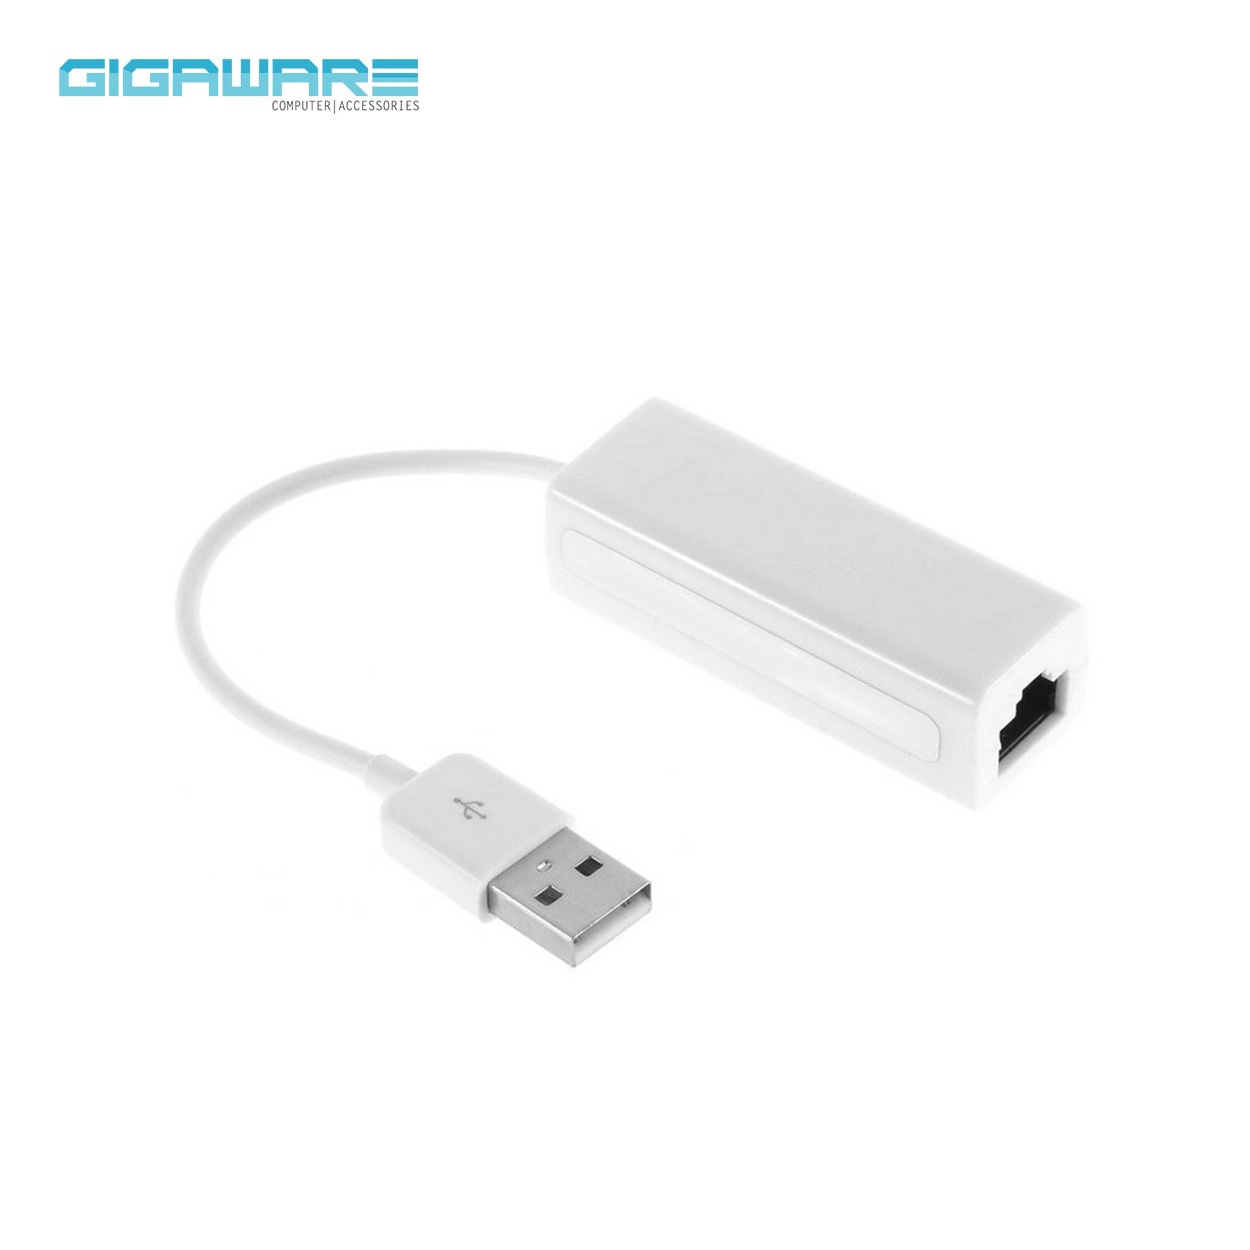 gigaware usb to ethernet speed is slow